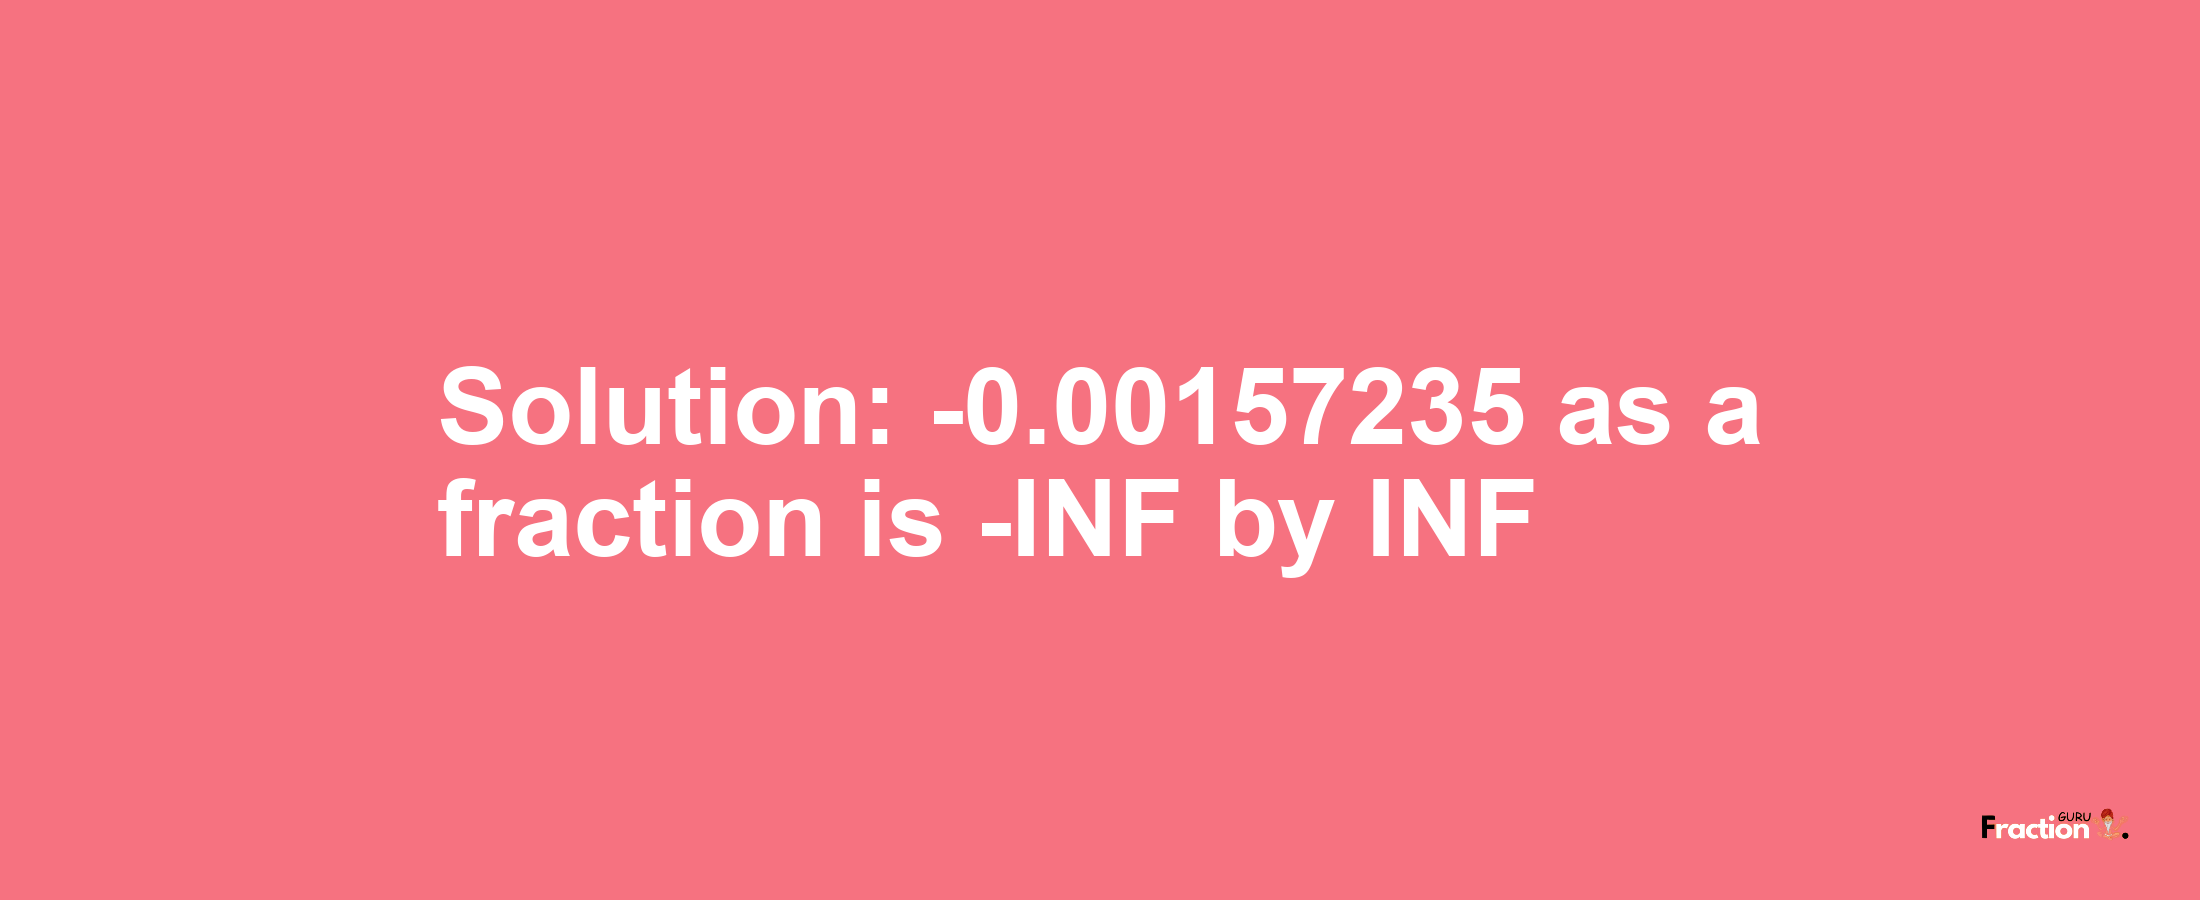 Solution:-0.00157235 as a fraction is -INF/INF